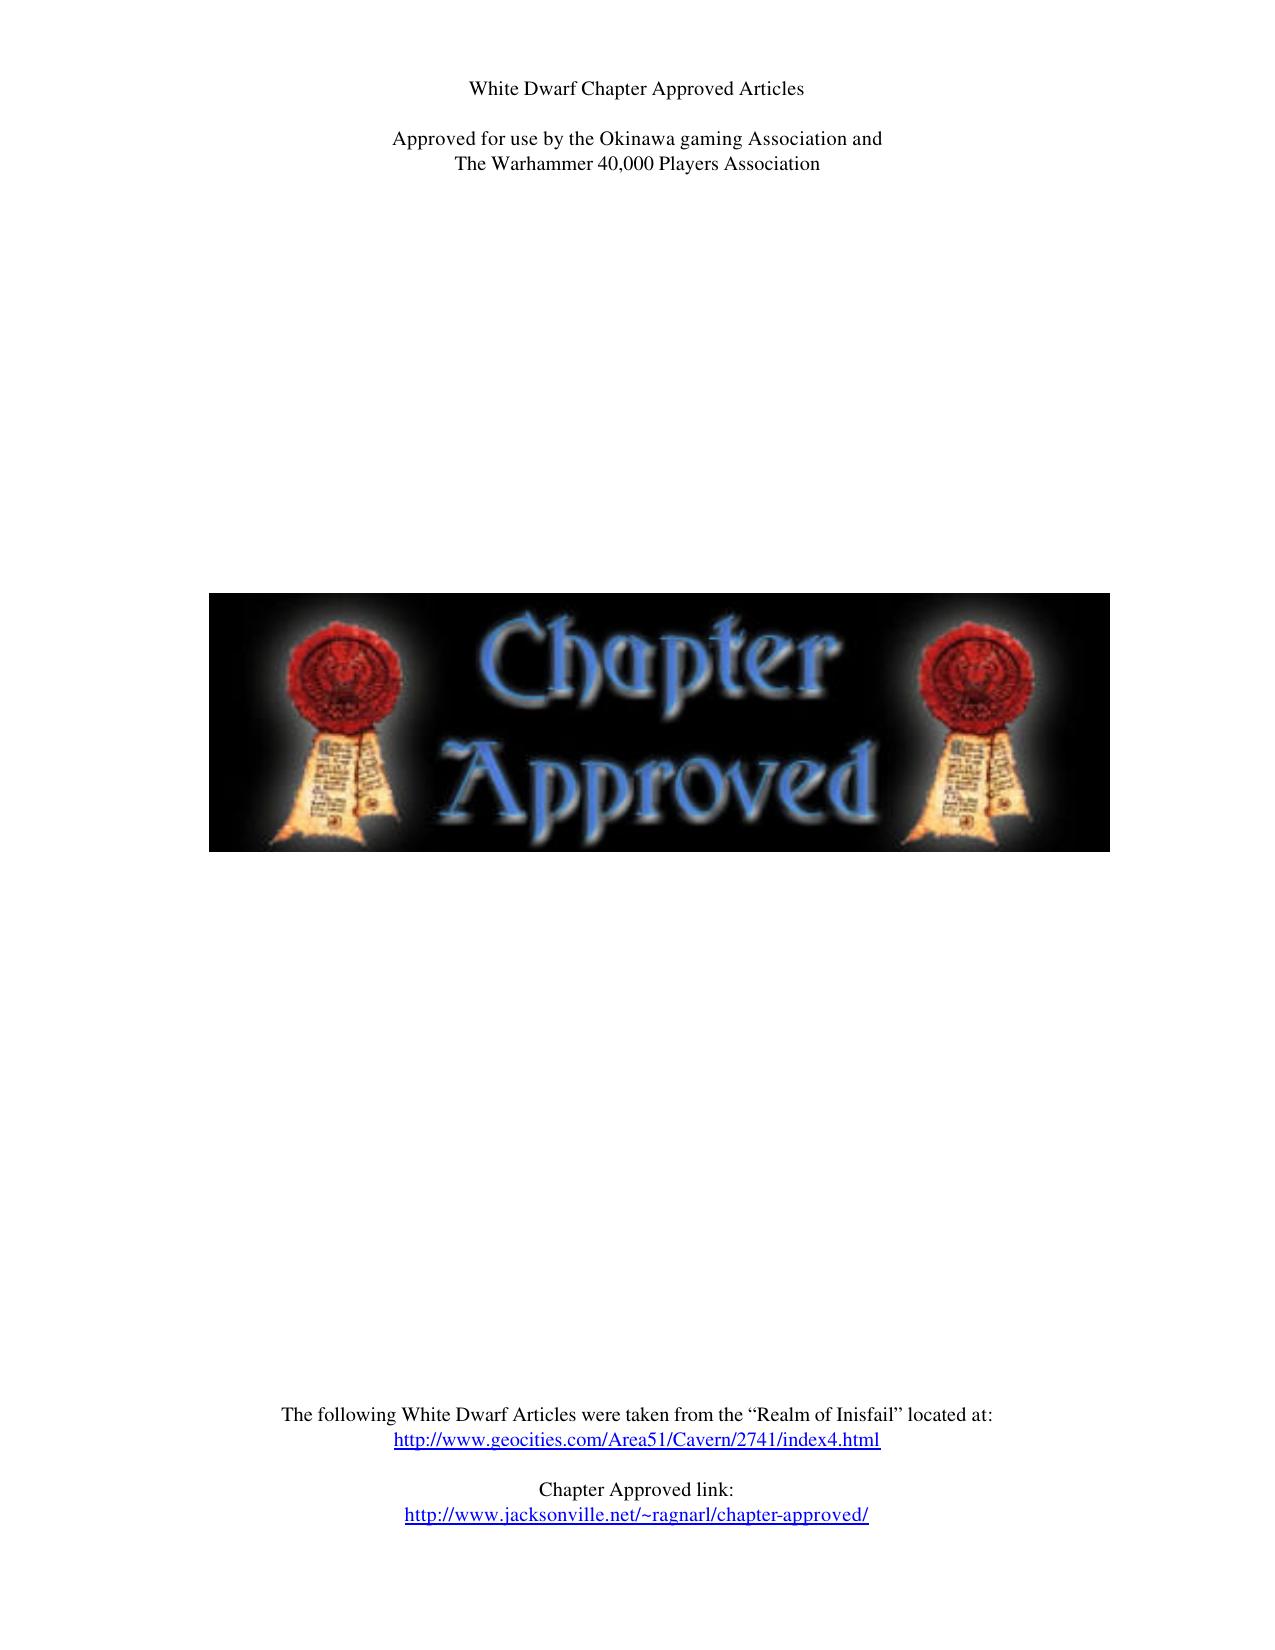 Chapter Approved